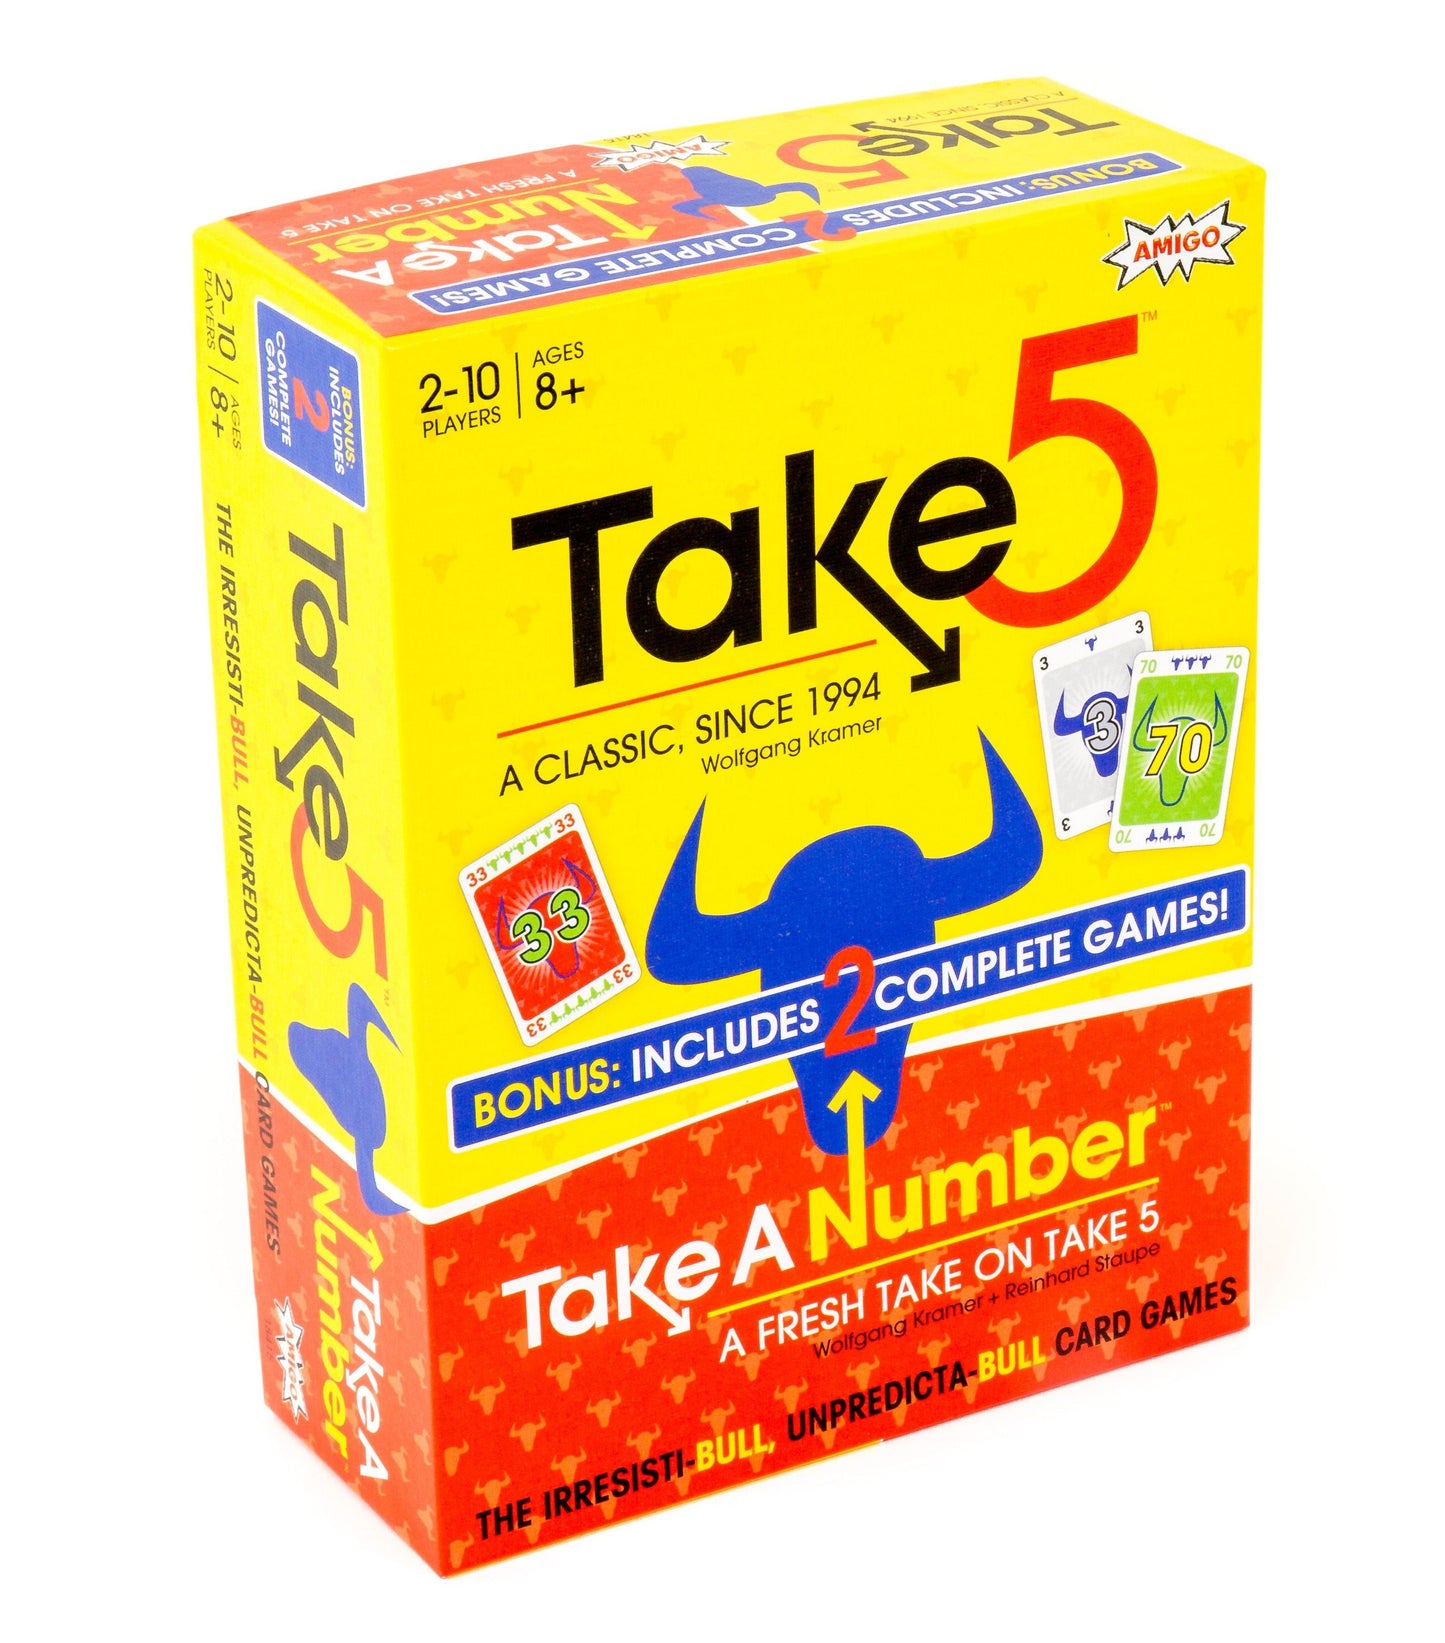 Take 5 and Take a Number (6 nimmt! and X nimmt!)